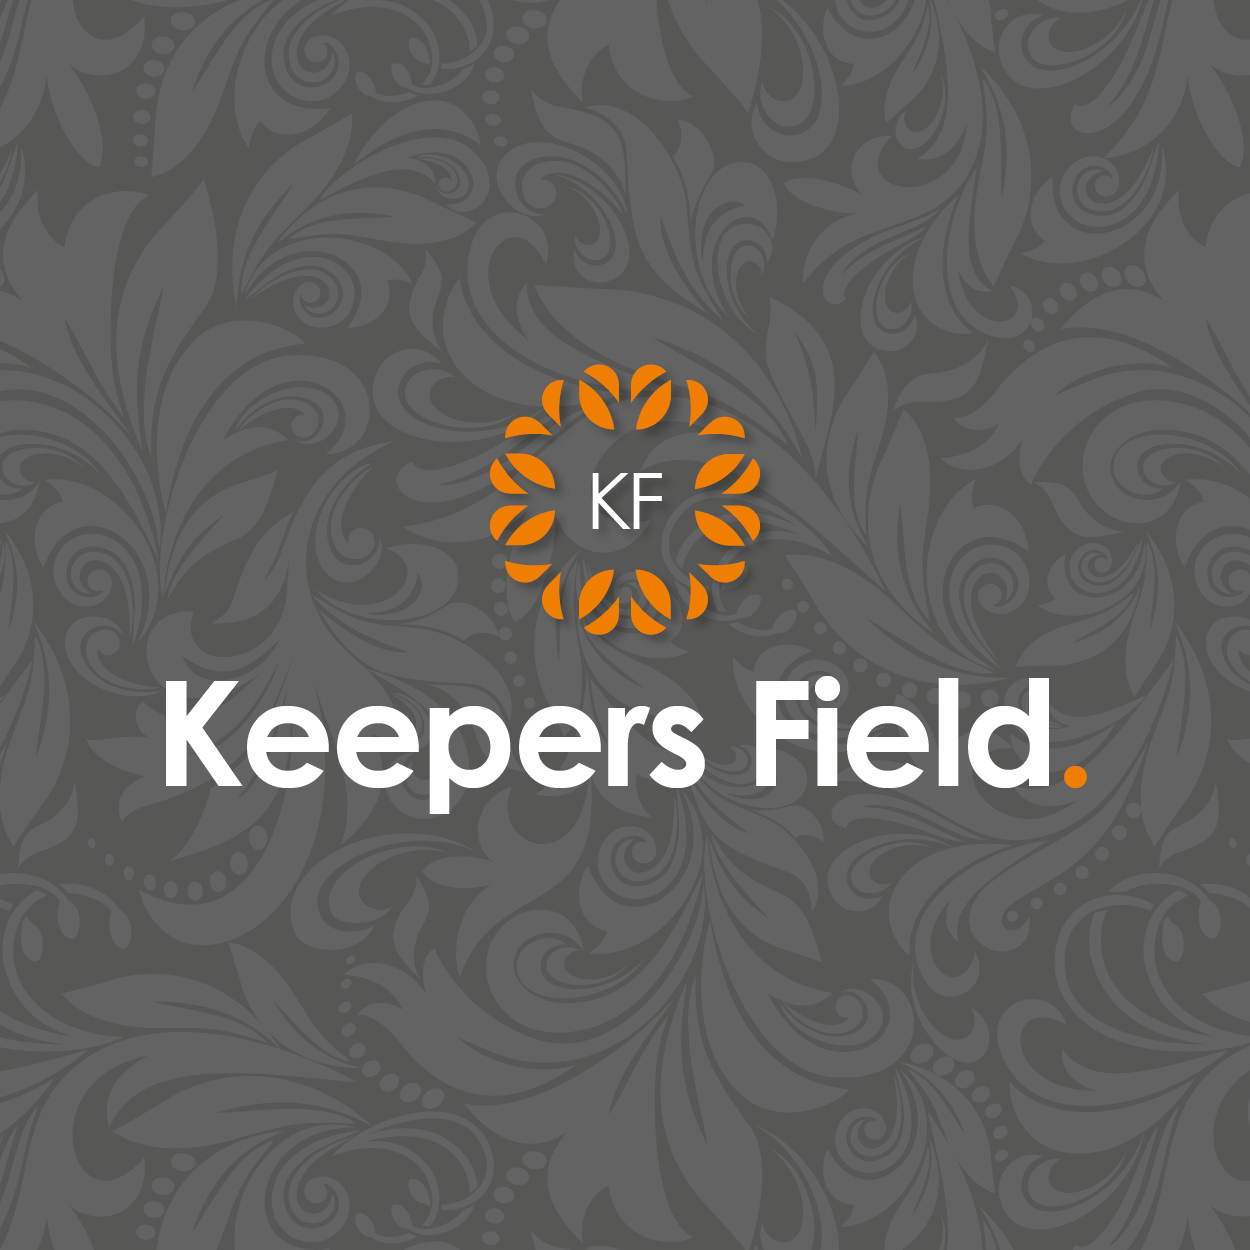 keepers Field crest